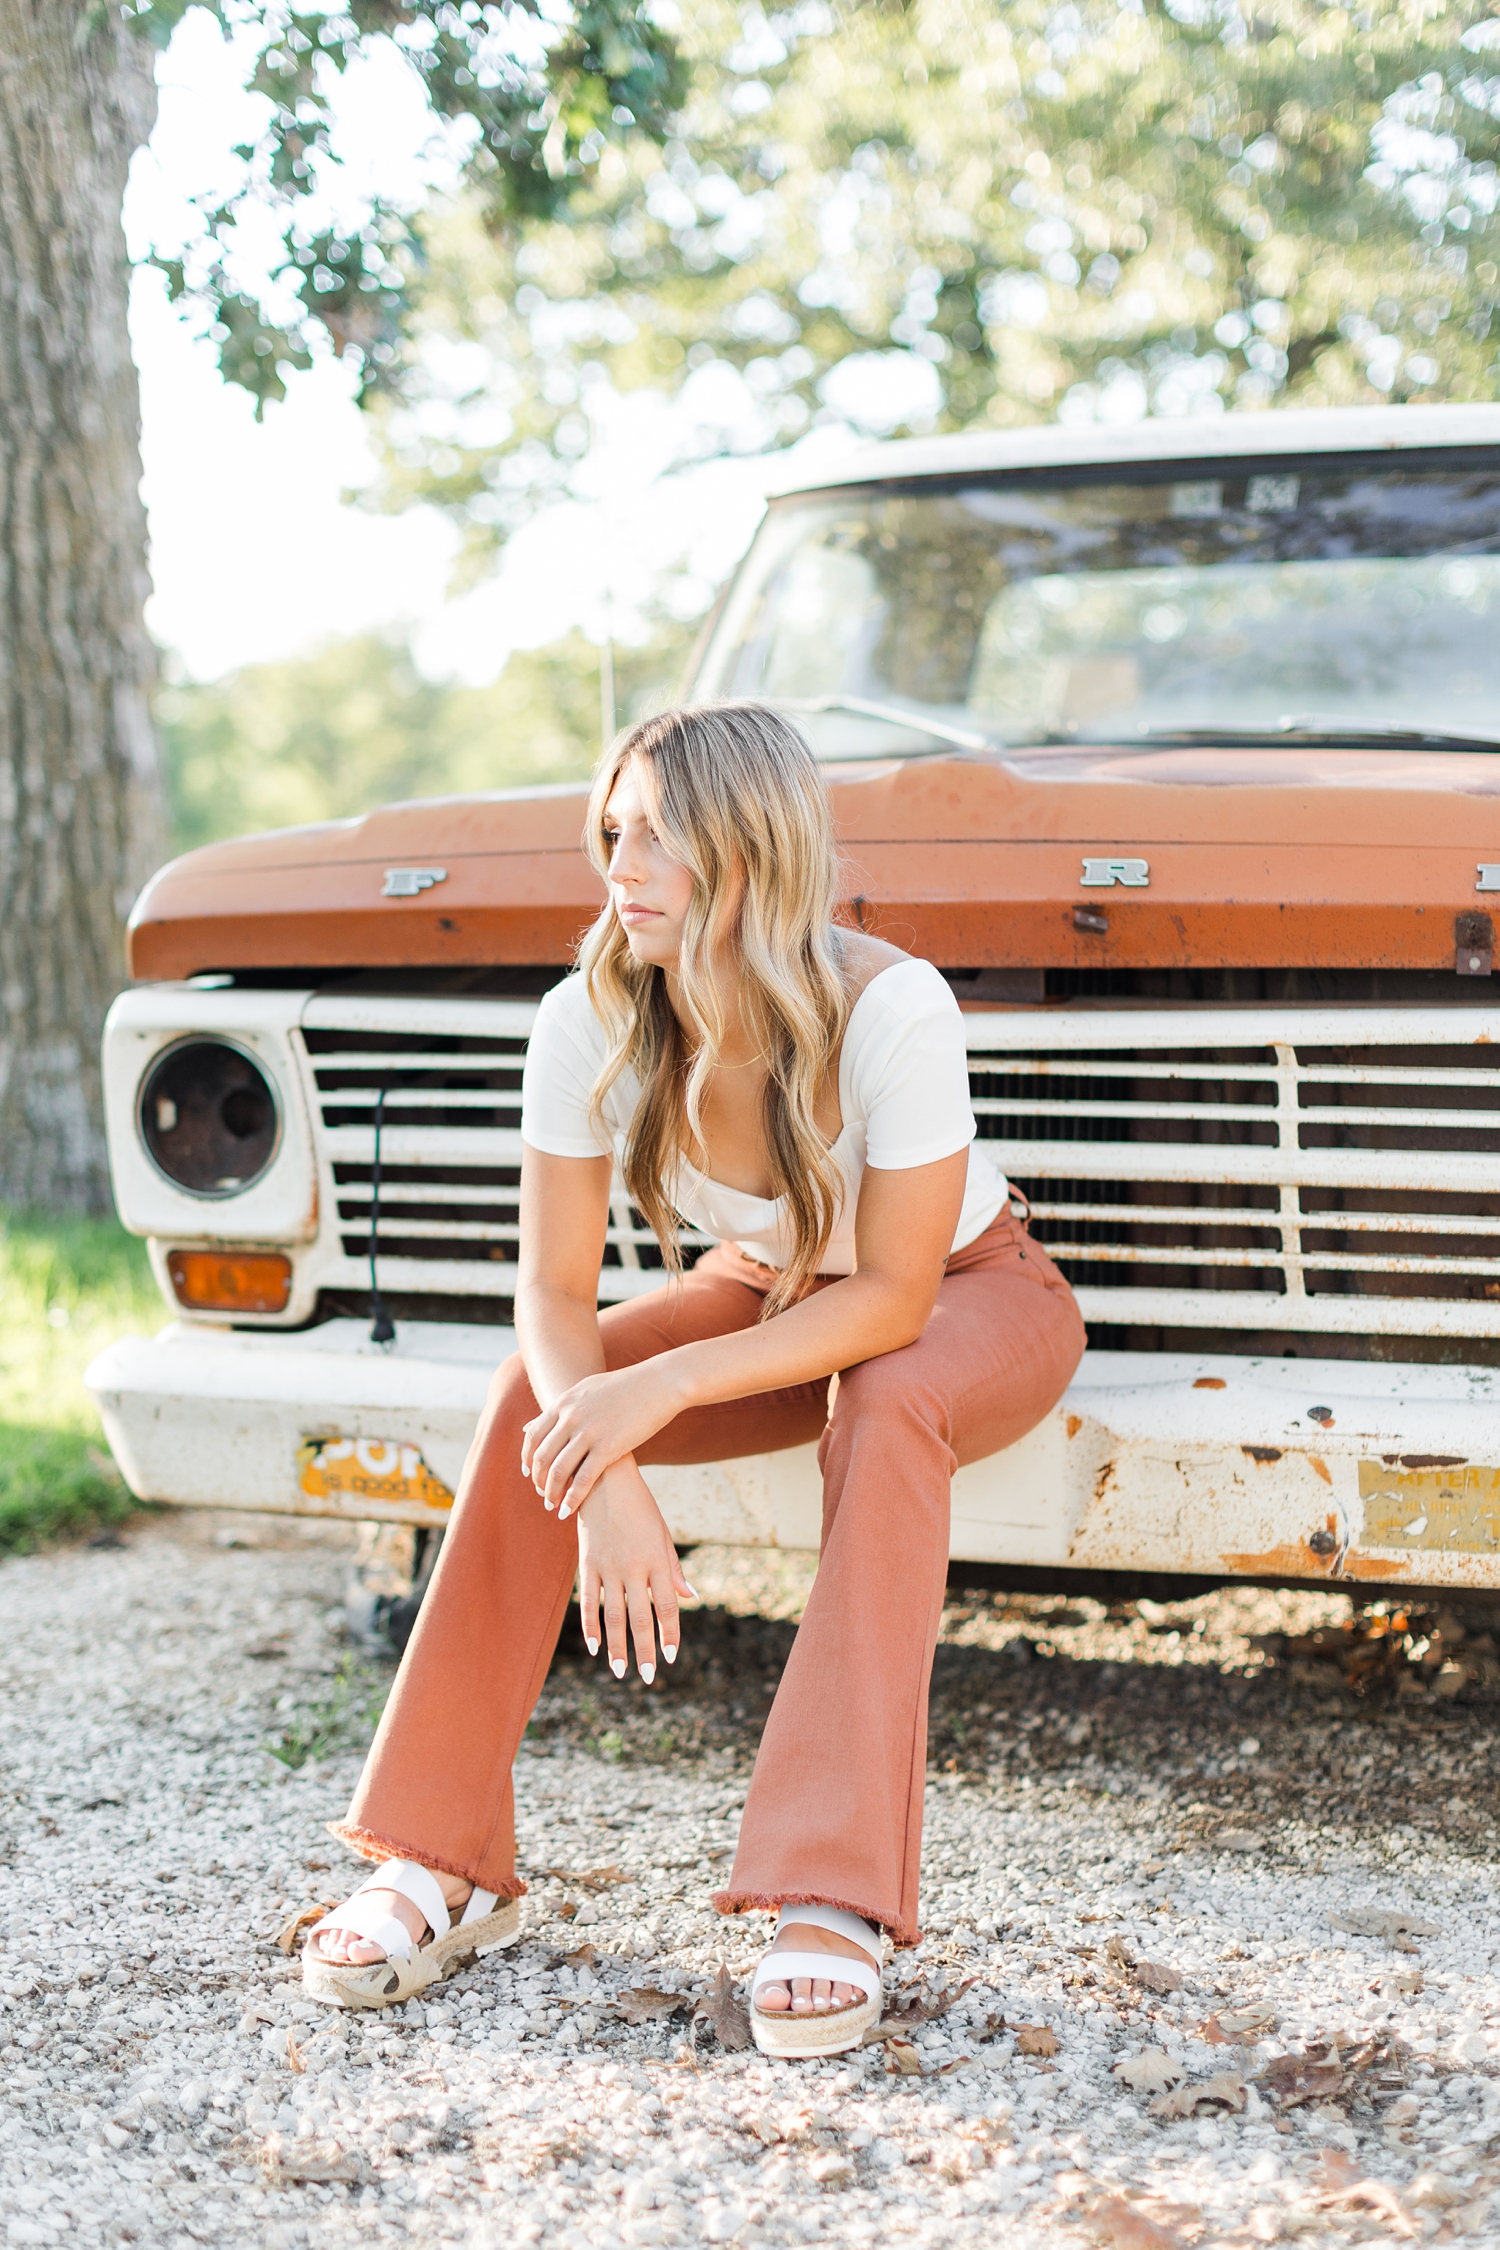 Eden, wearing a white top and burnt orange flared pants, sits on the bumper of a two-tone, white and burnt orange, 70's Ford truck | CB Studio